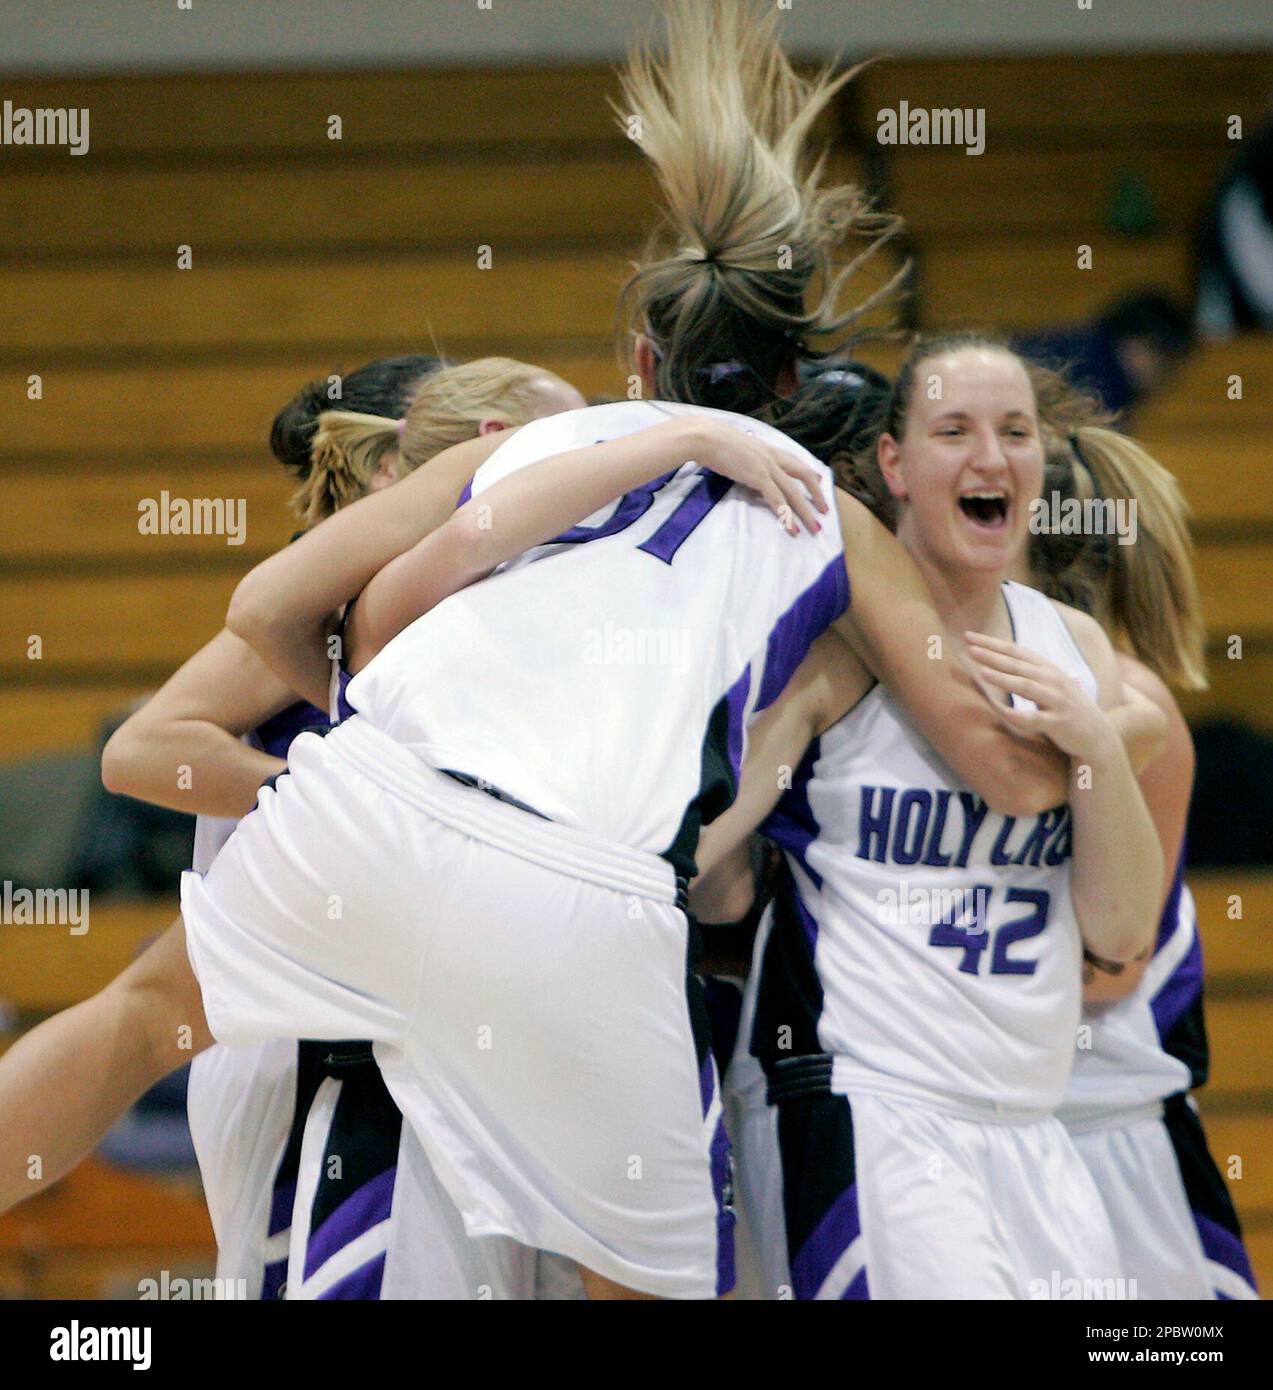 https://c8.alamy.com/comp/2PBW0MX/holy-cross-center-ashley-brennan-mcbride-leaps-into-the-arms-of-her-teammates-and-forward-kathy-gruzynski-right-at-the-conclusion-of-their-patriot-league-tournament-championship-basketball-game-wednesday-march-7-2007-in-worcester-mass-holy-cross-defeated-american-56-48-to-win-the-womens-patriot-league-championship-and-an-automatic-bid-in-the-ncaa-tournament-ap-photogreg-m-cooper-2PBW0MX.jpg